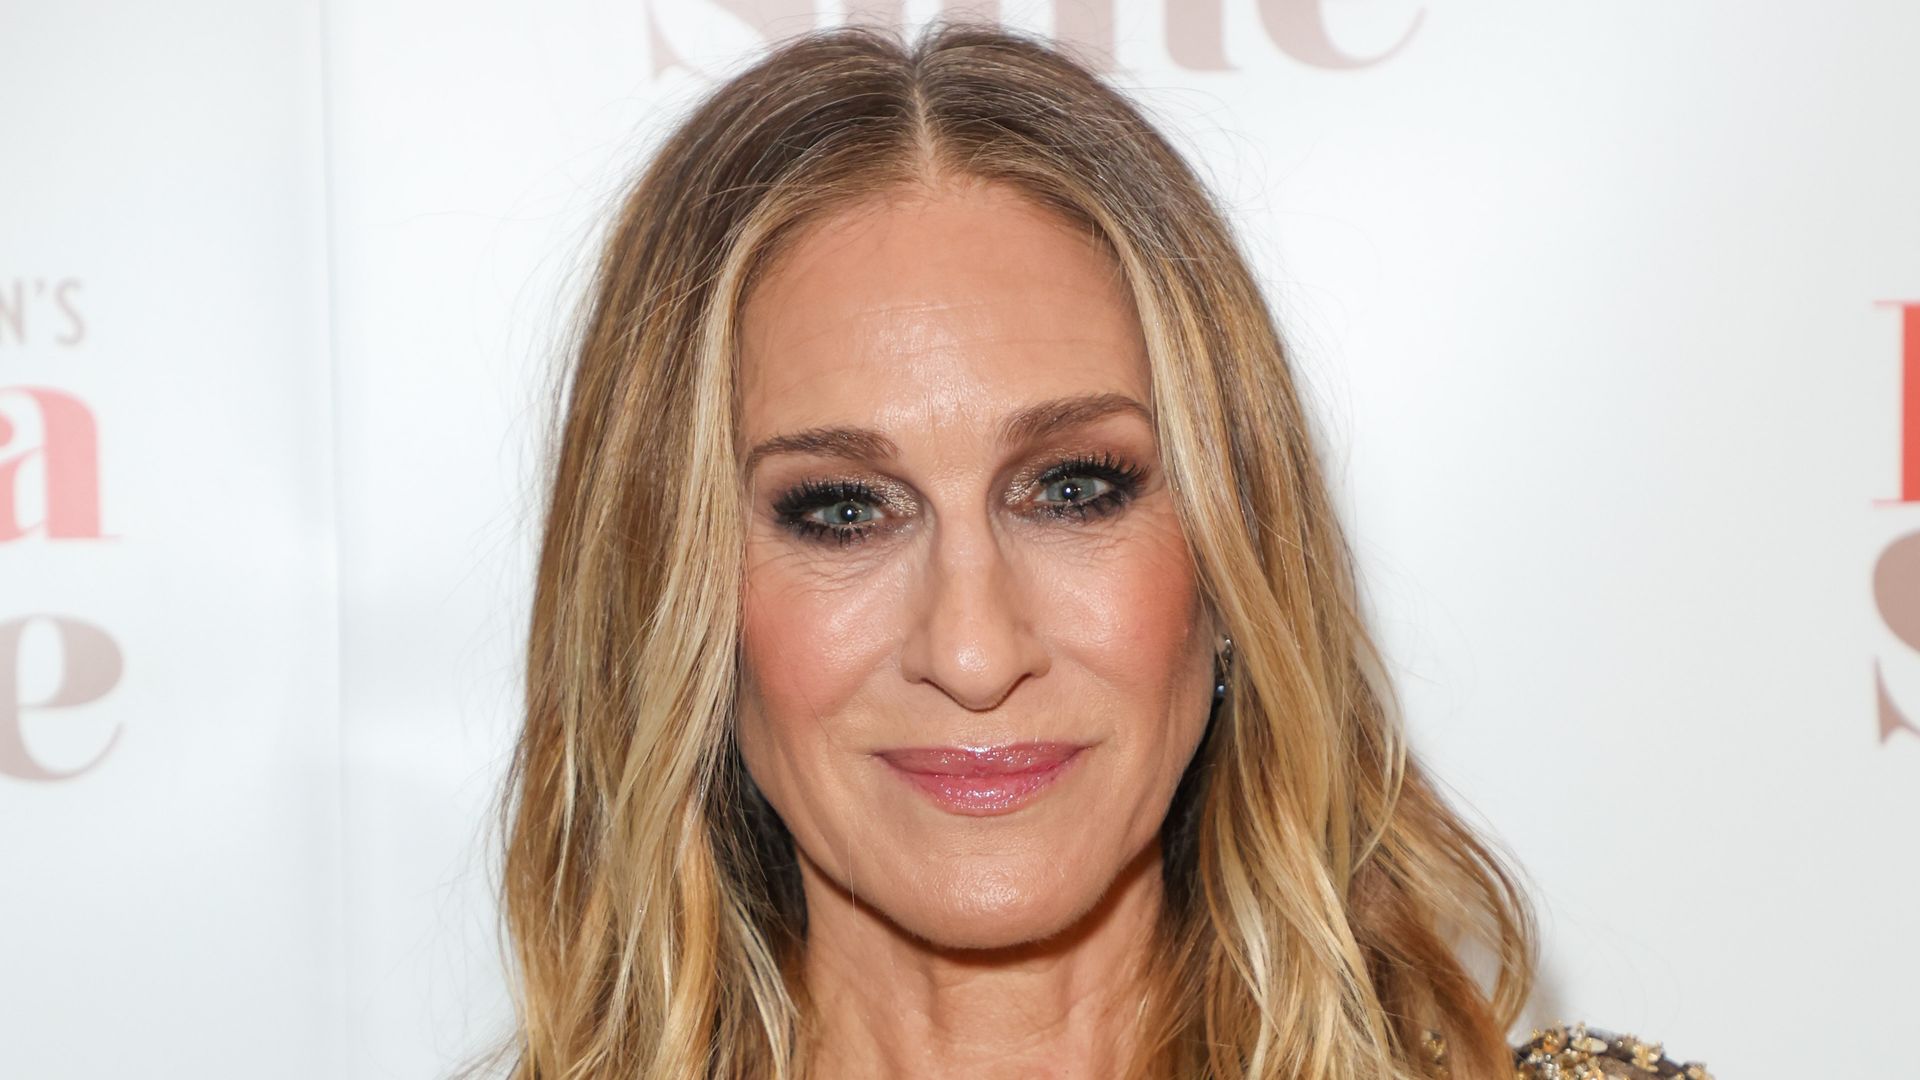 LONDON, ENGLAND - JANUARY 28: Sarah Jessica Parker attends the gala performance after party for "Plaza Suite" at The Savoy Hotel on January 28, 2024 in London, England. (Photo by Hoda Davaine/Dave Benett/Getty Images)